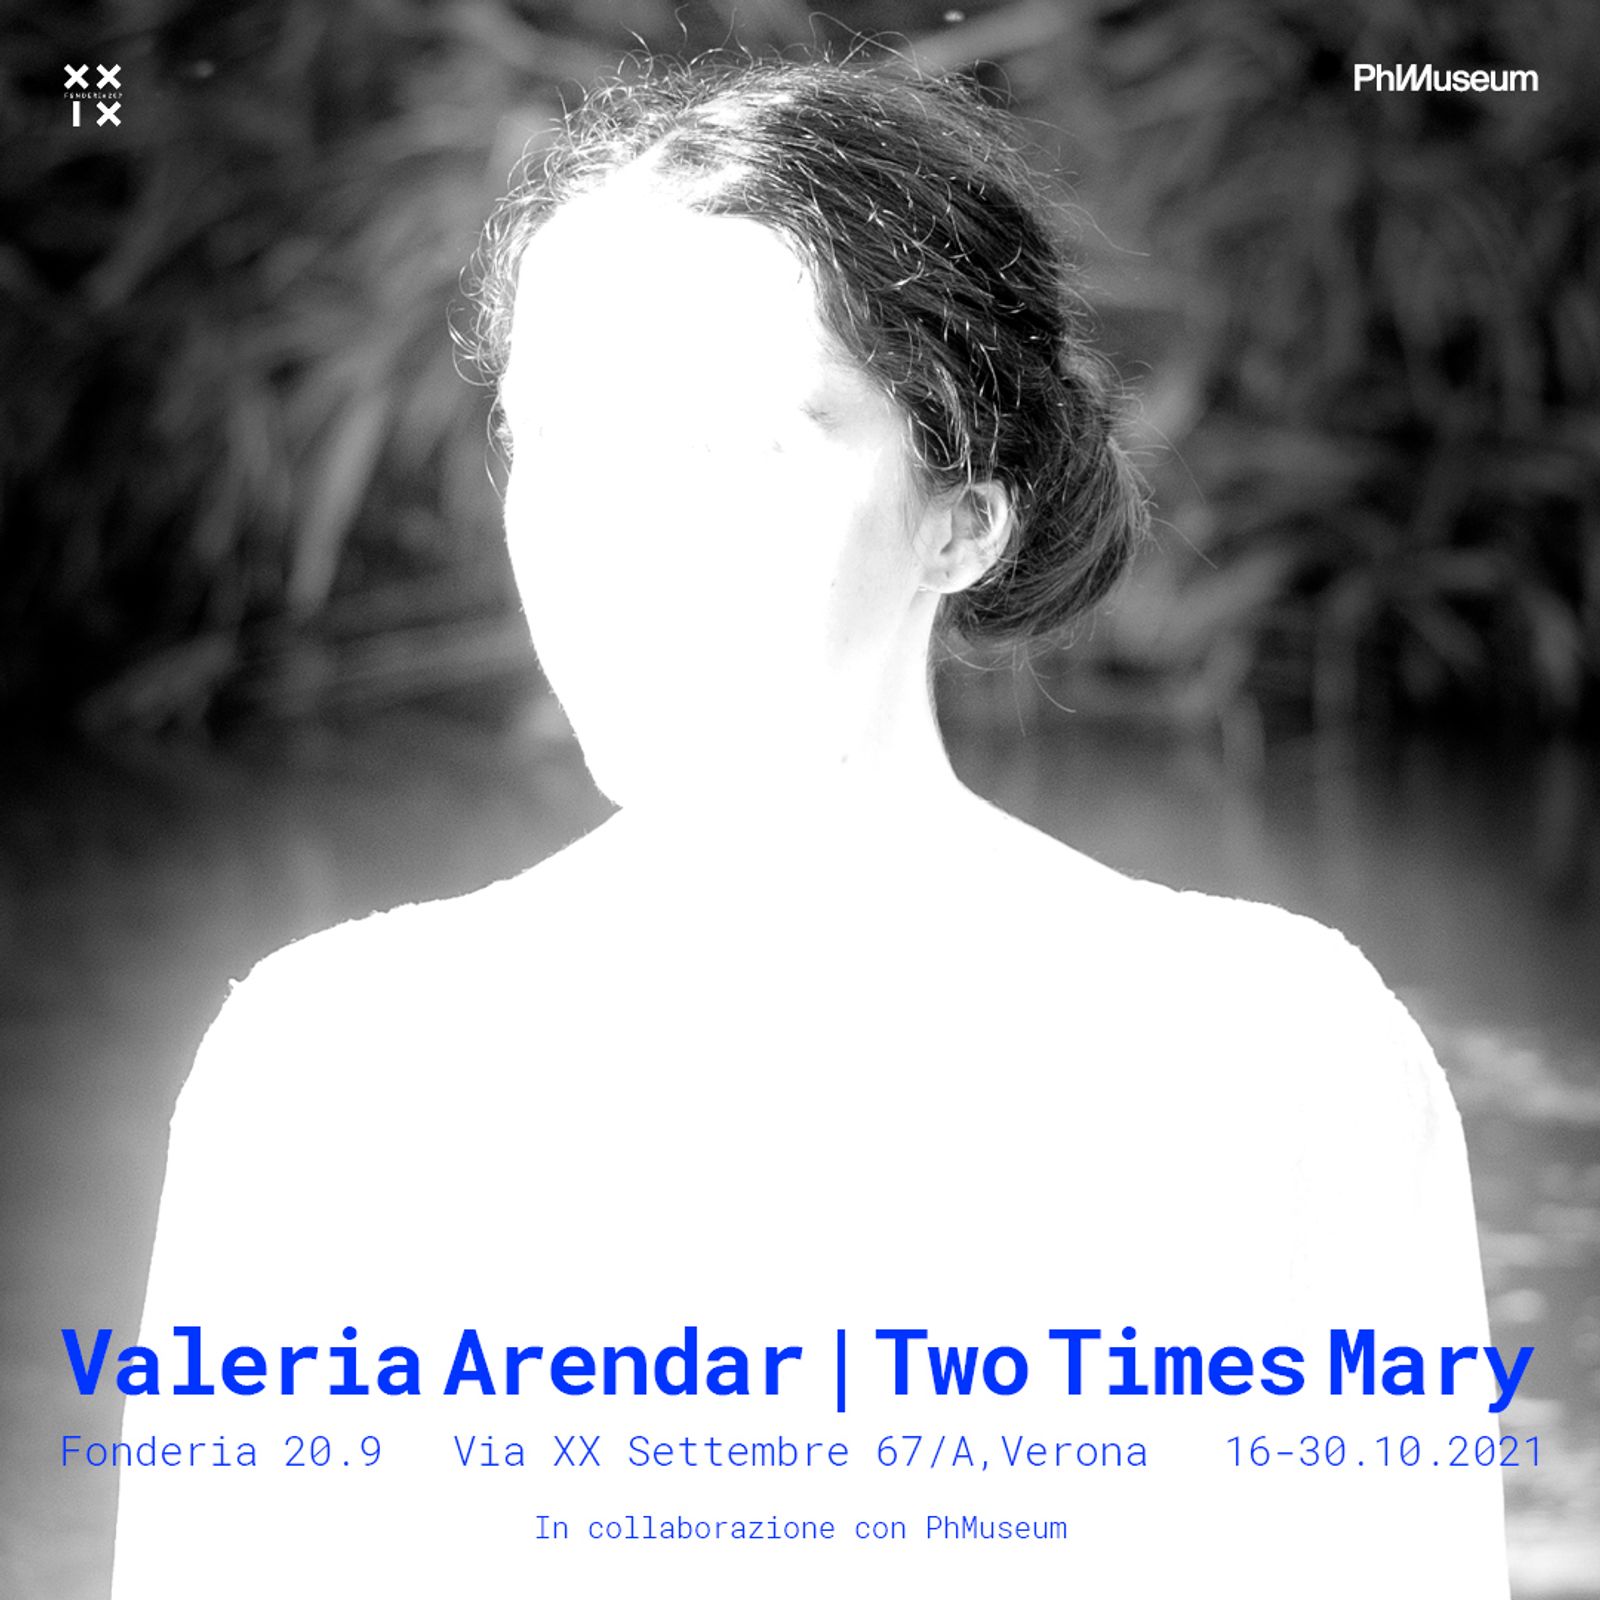 Two Times Mary's Exhibition Opens Next Week at Fonderia 20.9 In Verona